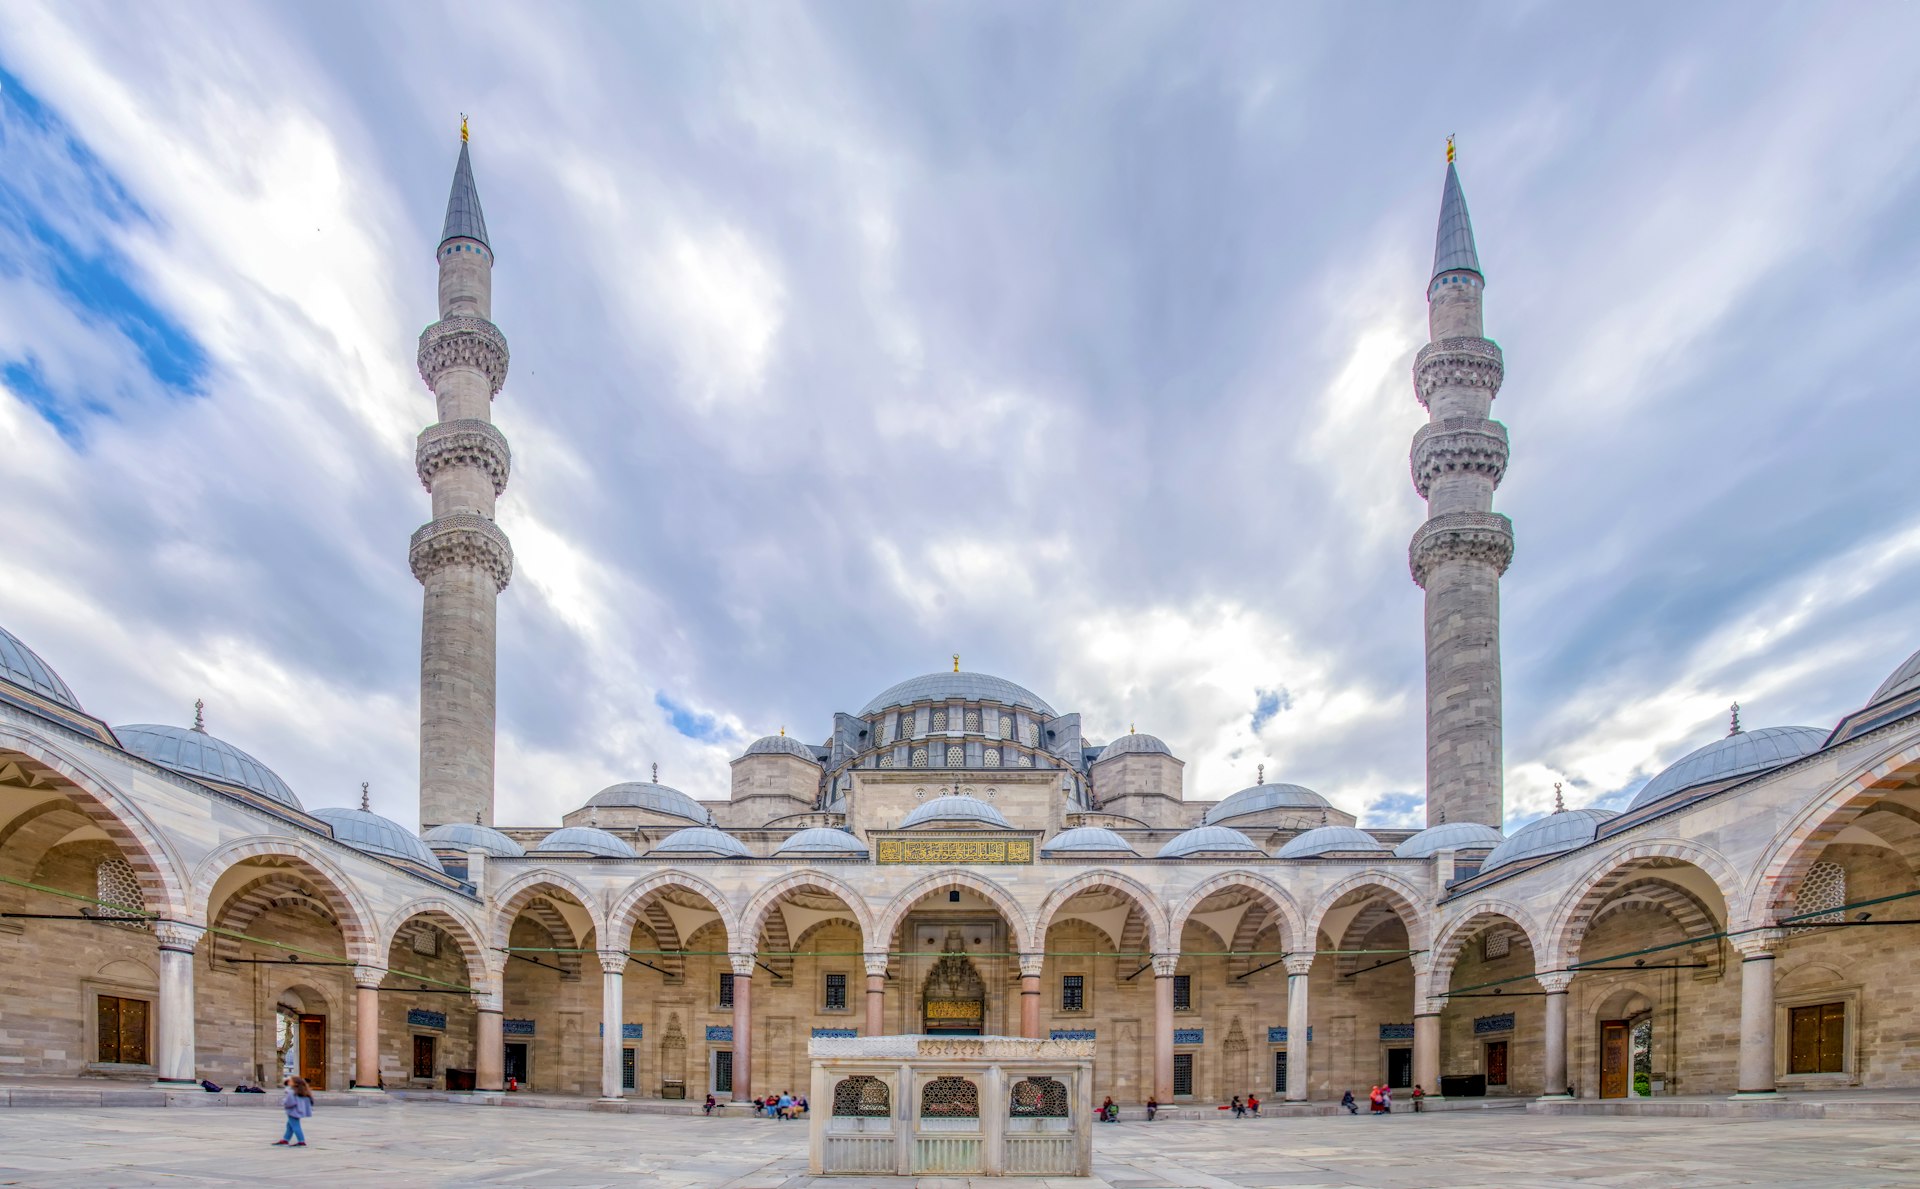 The tall minarets rise from the Suleymaniye Mosque on the Third Hill of Istanbul.